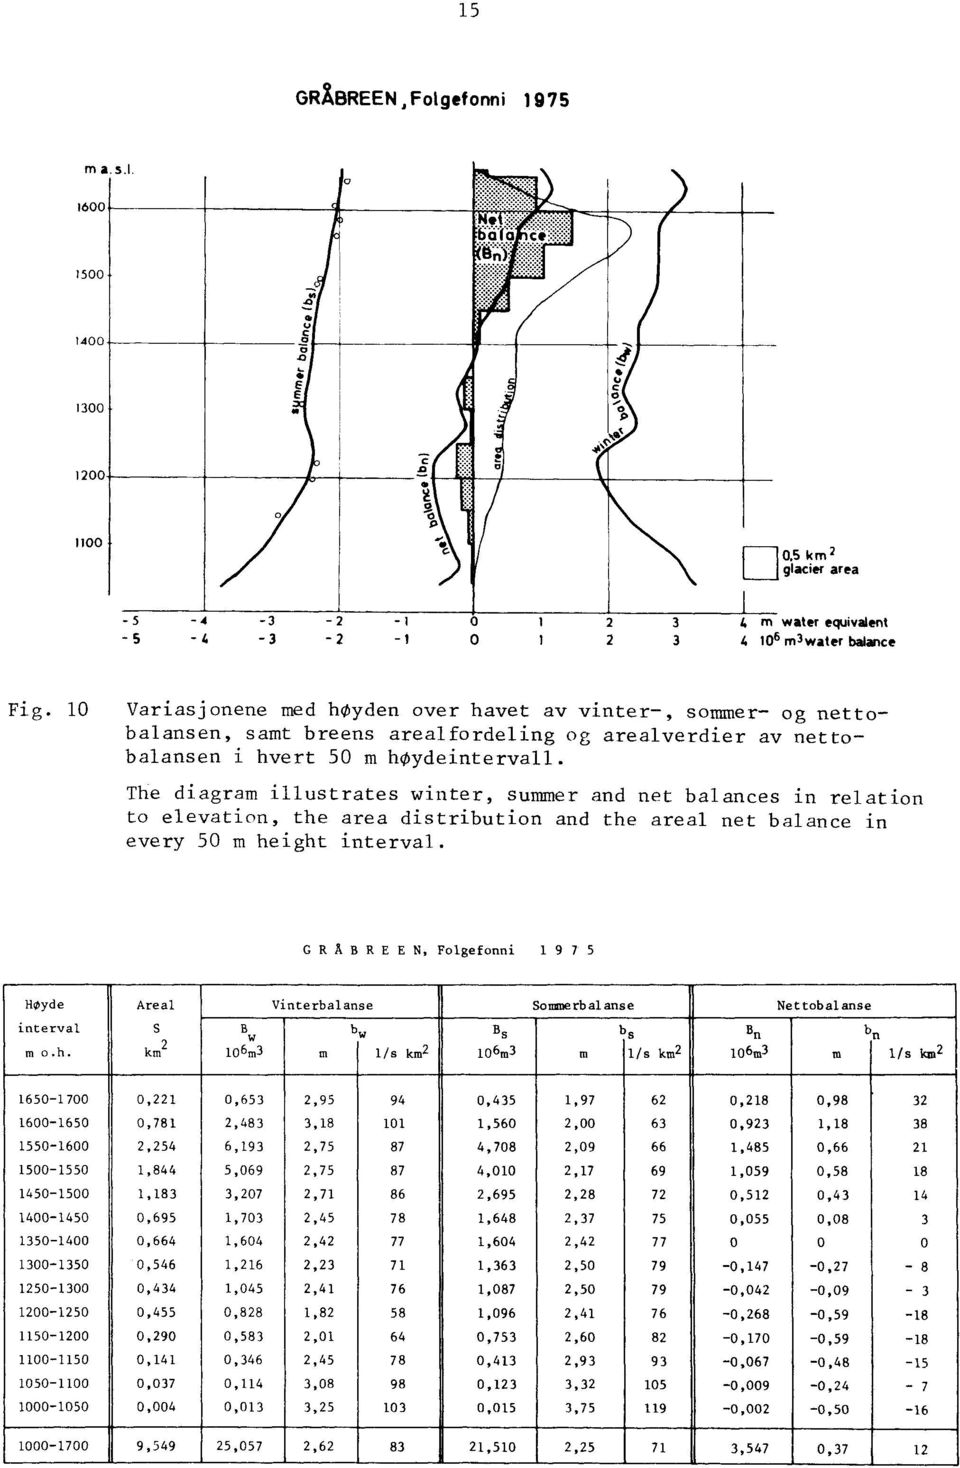 The diagram illustrates winter, summer and net balances in relation to elevation, the area distribution and the areal net balanee in every 50 m height interval.